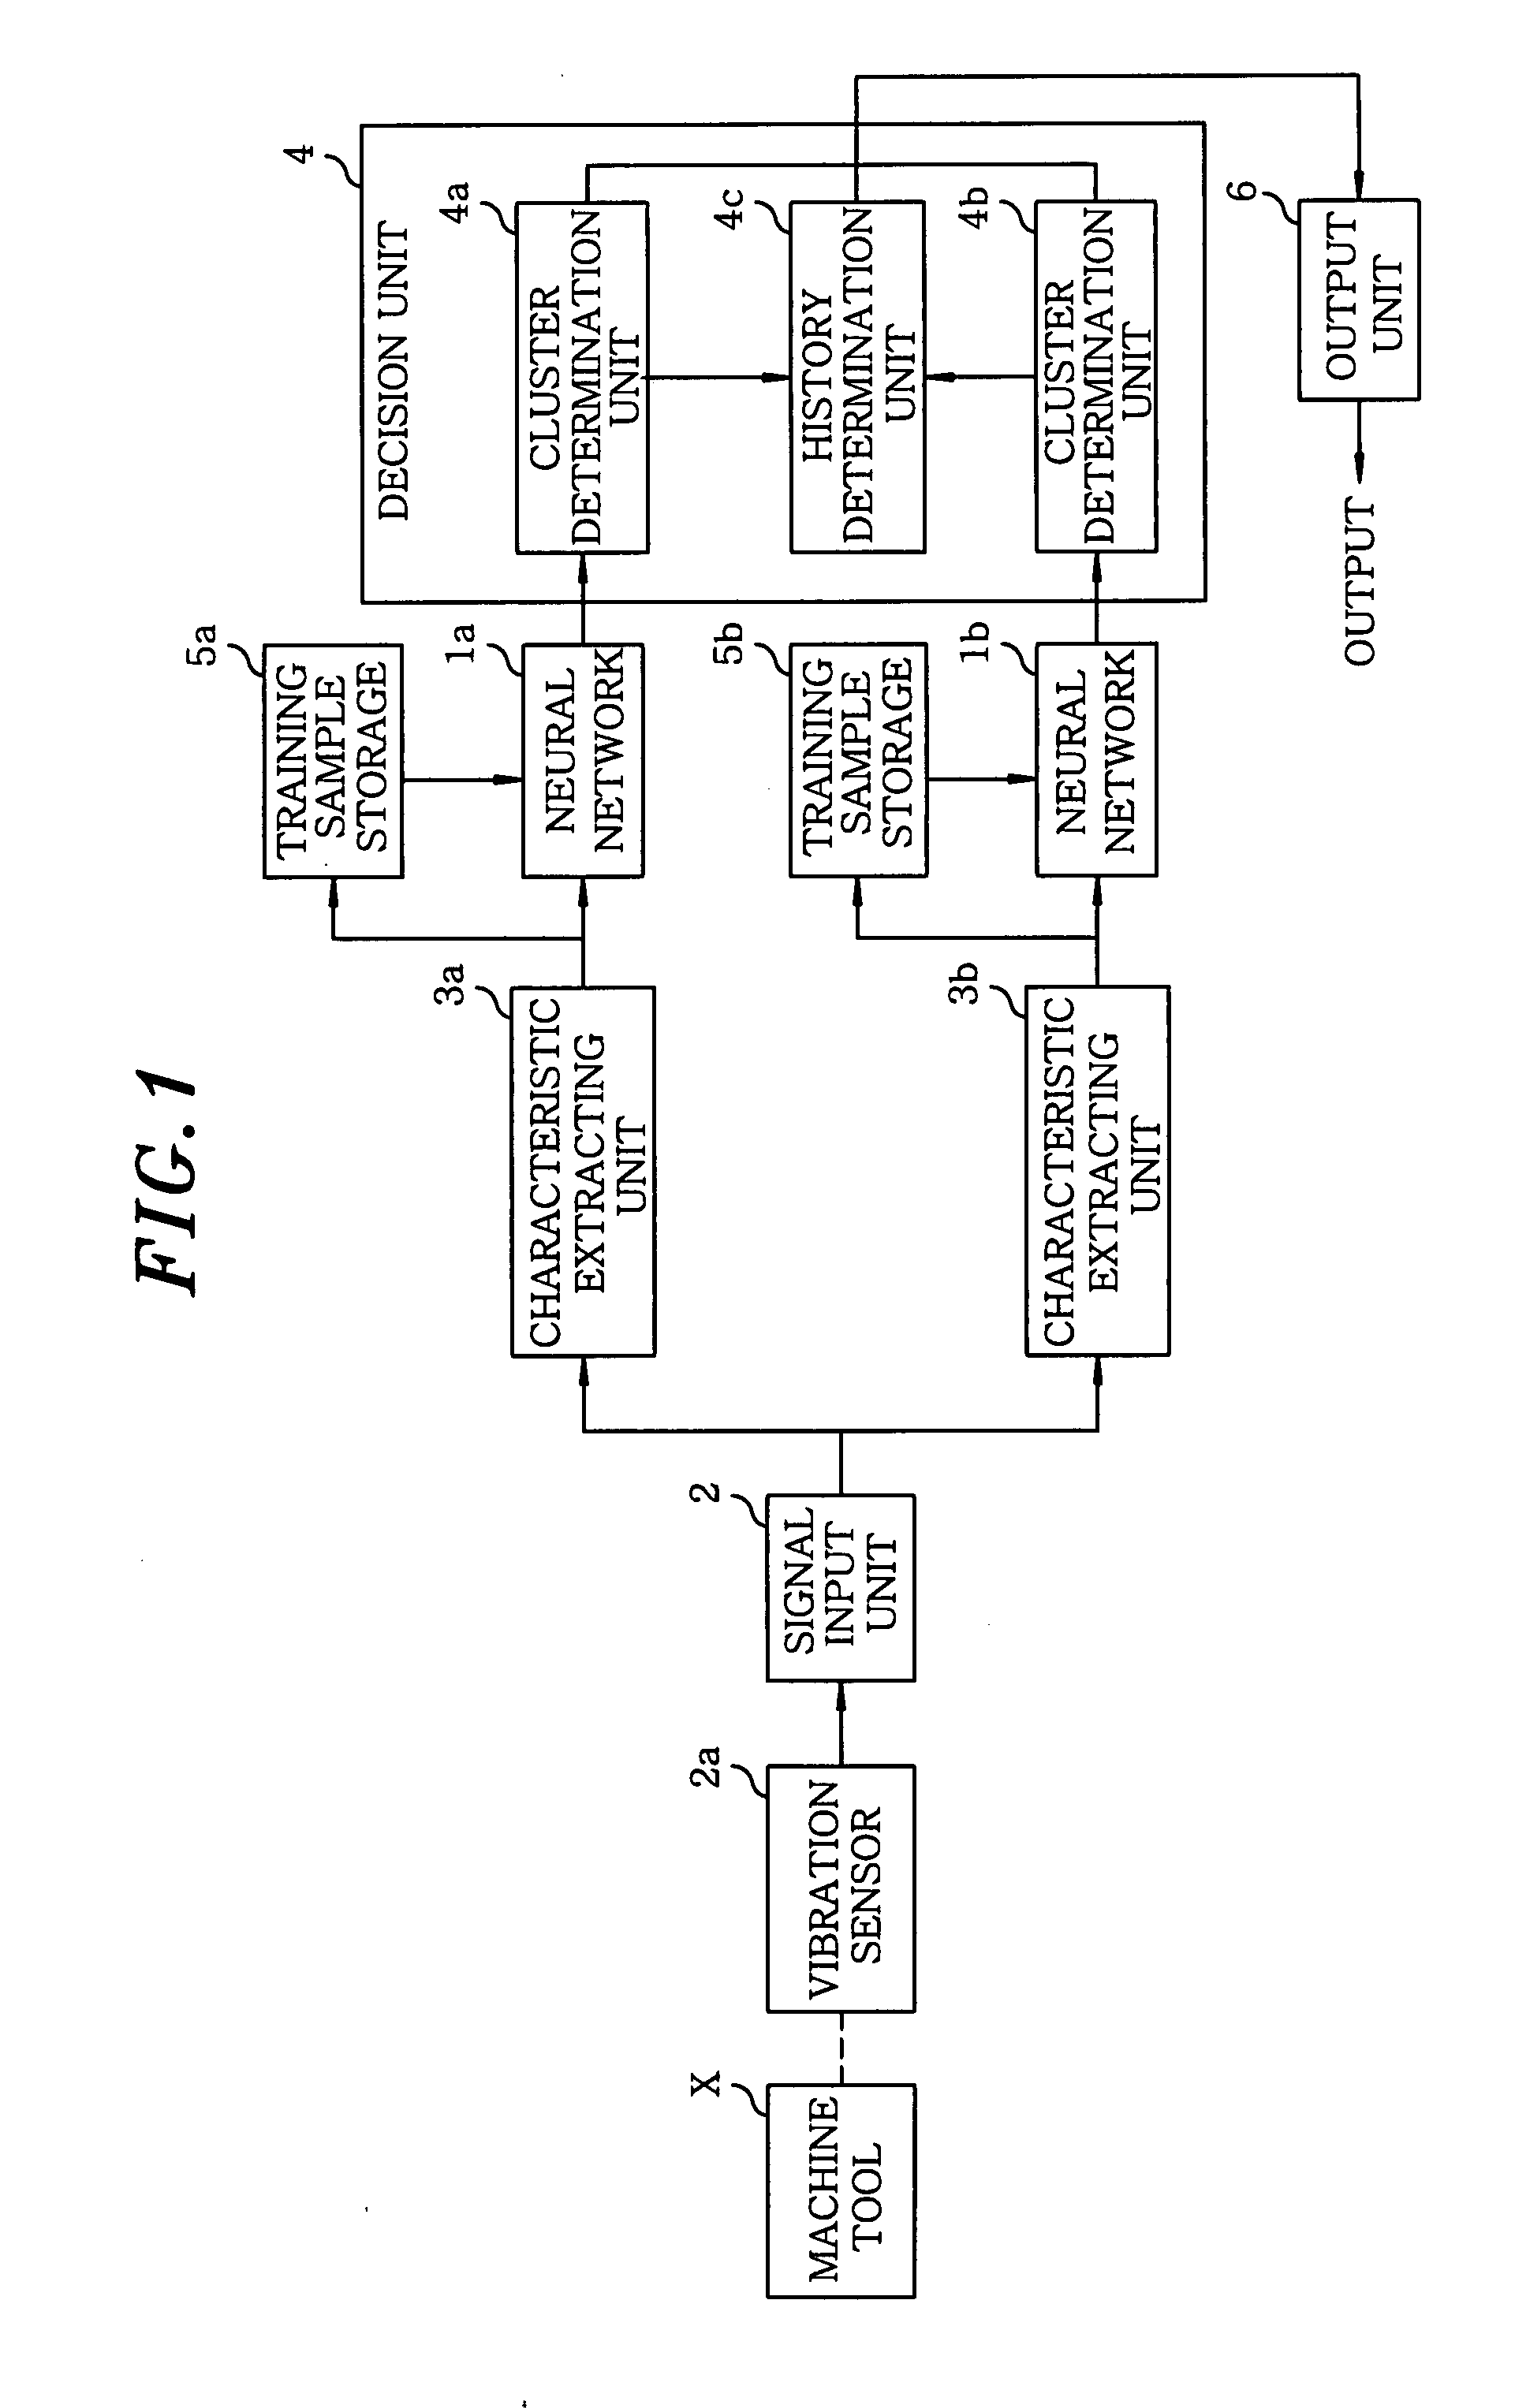 Device for overall machine tool monitoring